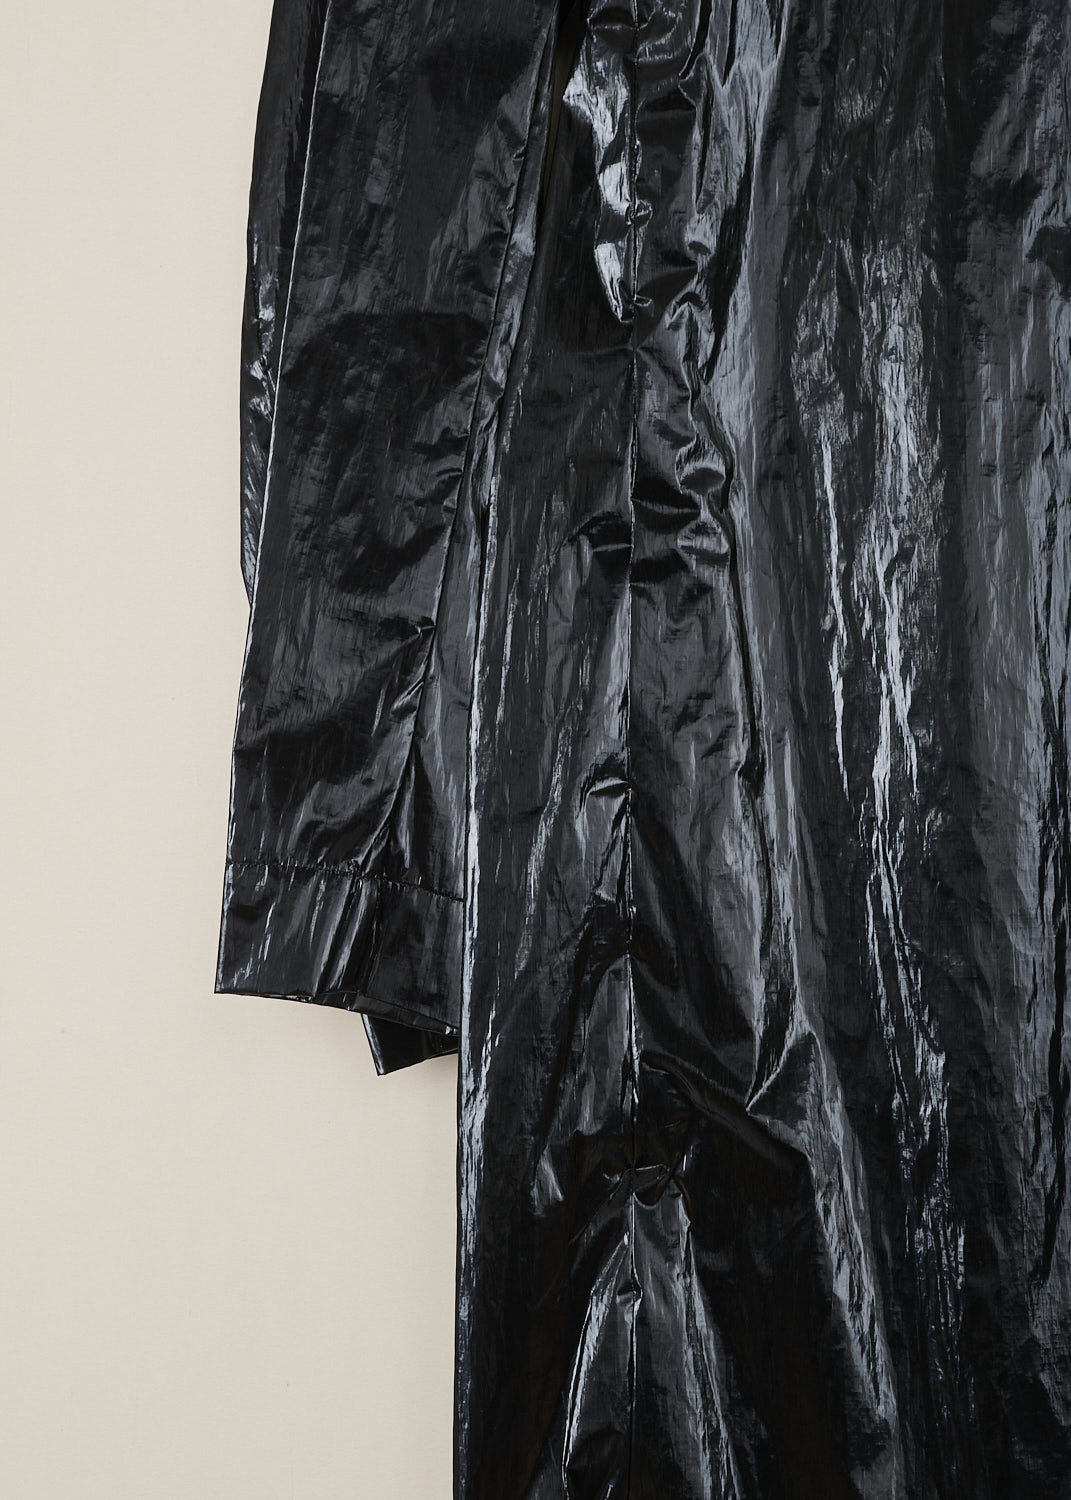 DRIES VAN NOTEN, GLOSSY BLACK COAT, ROXAN_2158_WW_COAT_BLA, Black, Detail 1, This glossy black coat features a spread collar, a front button closure and padded shoulders. The coat has slanted pockets. The hemline is straight.  
